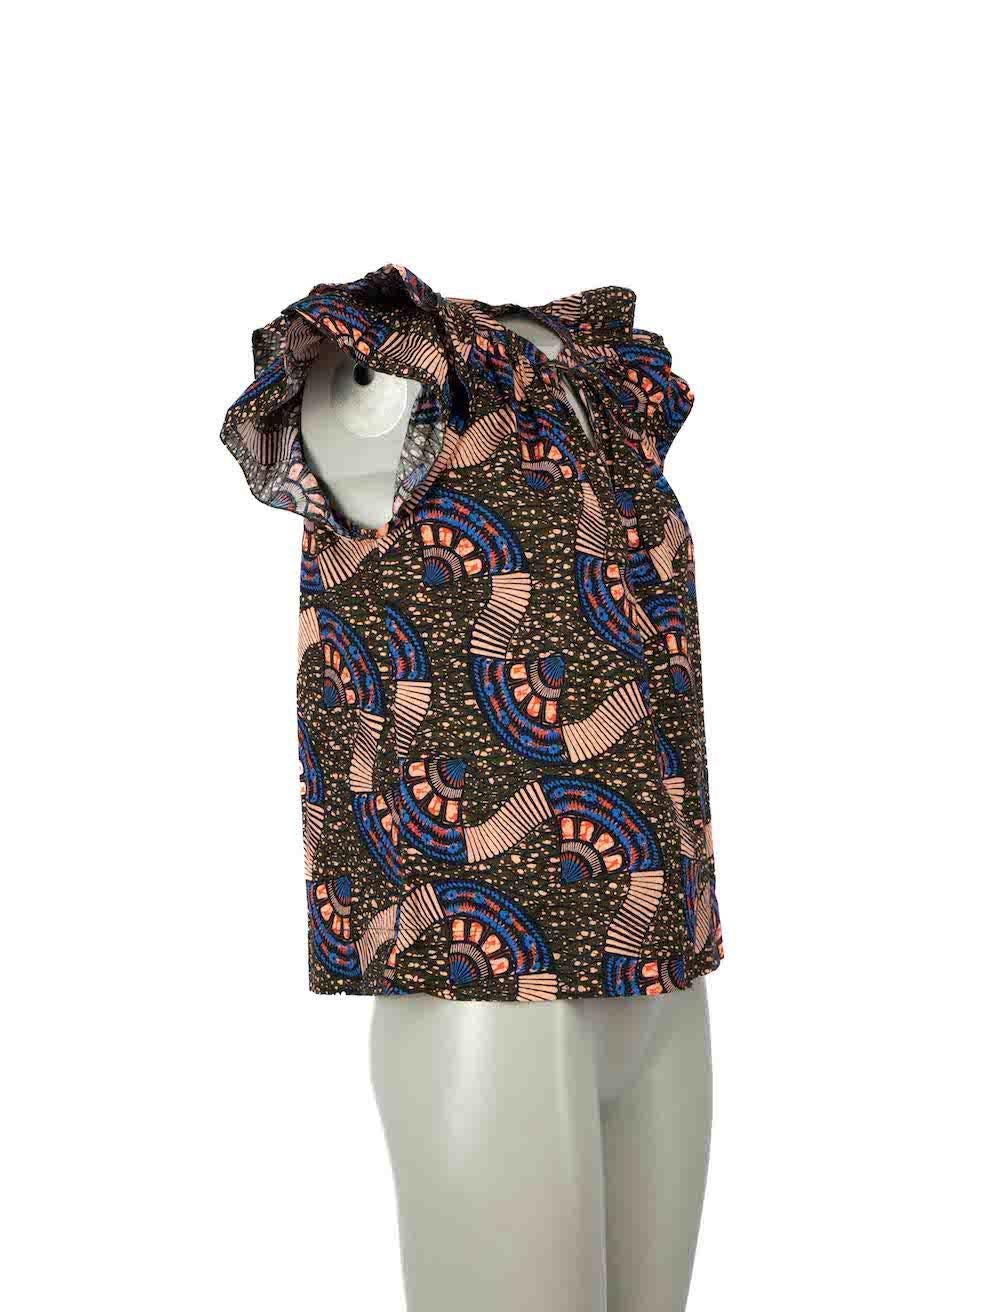 CONDITION is Very good. Hardly any visible wear to top is evident on this used Ulla Johnson designer resale item.

Details
Multicolour
Cotton
Top
Abstract pattern
Sleeveless
Round neck
Neck tie detail

Composition
NO COMPOSITION LABEL BUT FEELS LIKE